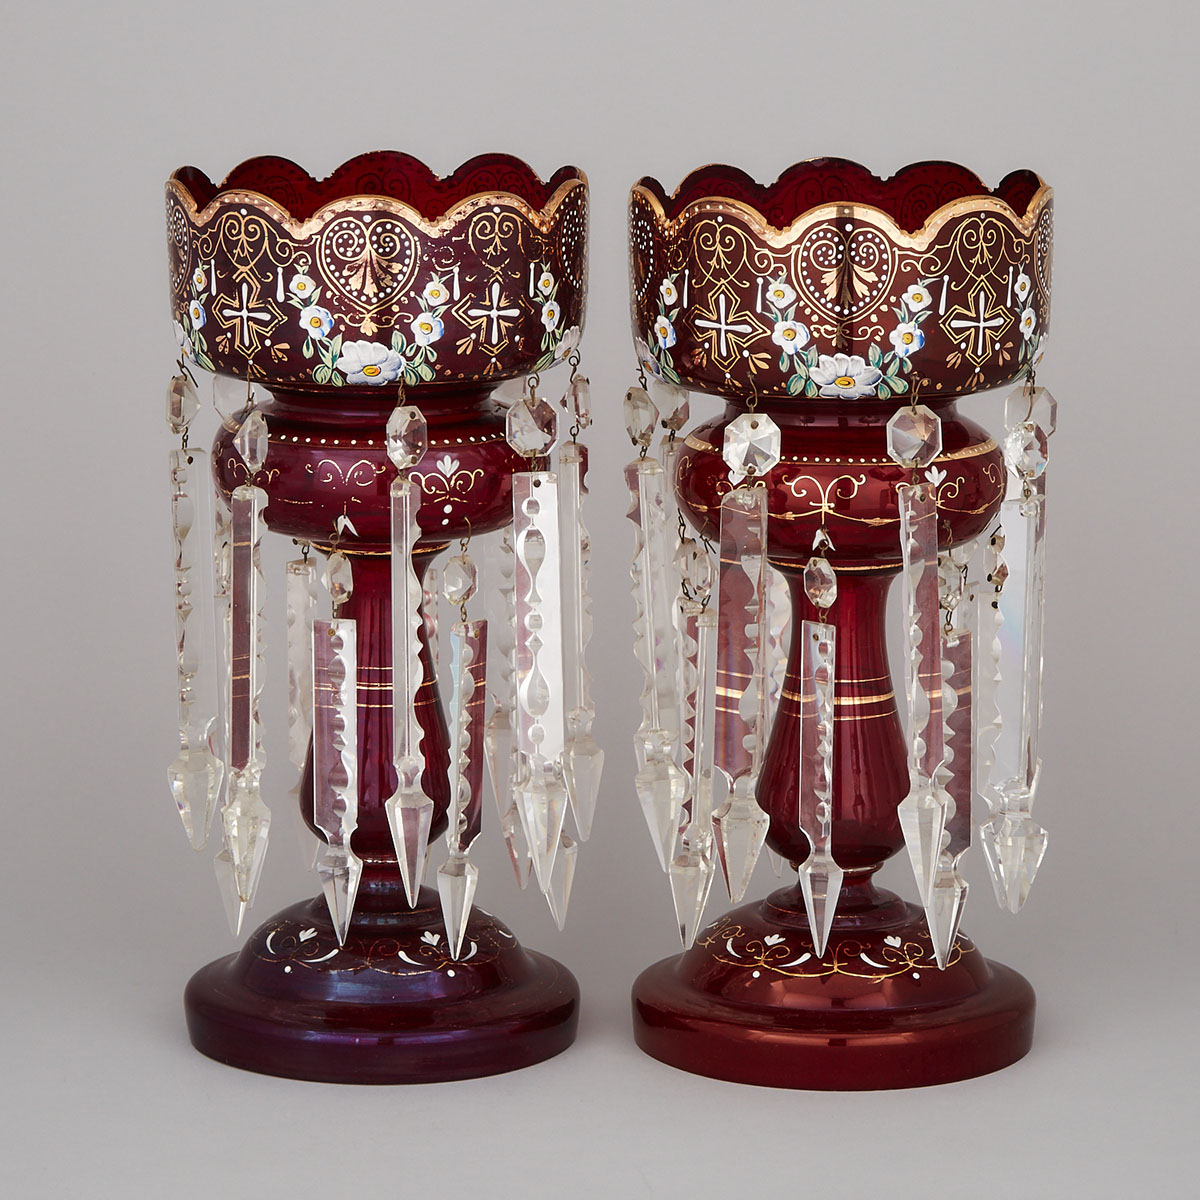 Pair of Enameled and Gilt Red Glass Lustres, late 19th century